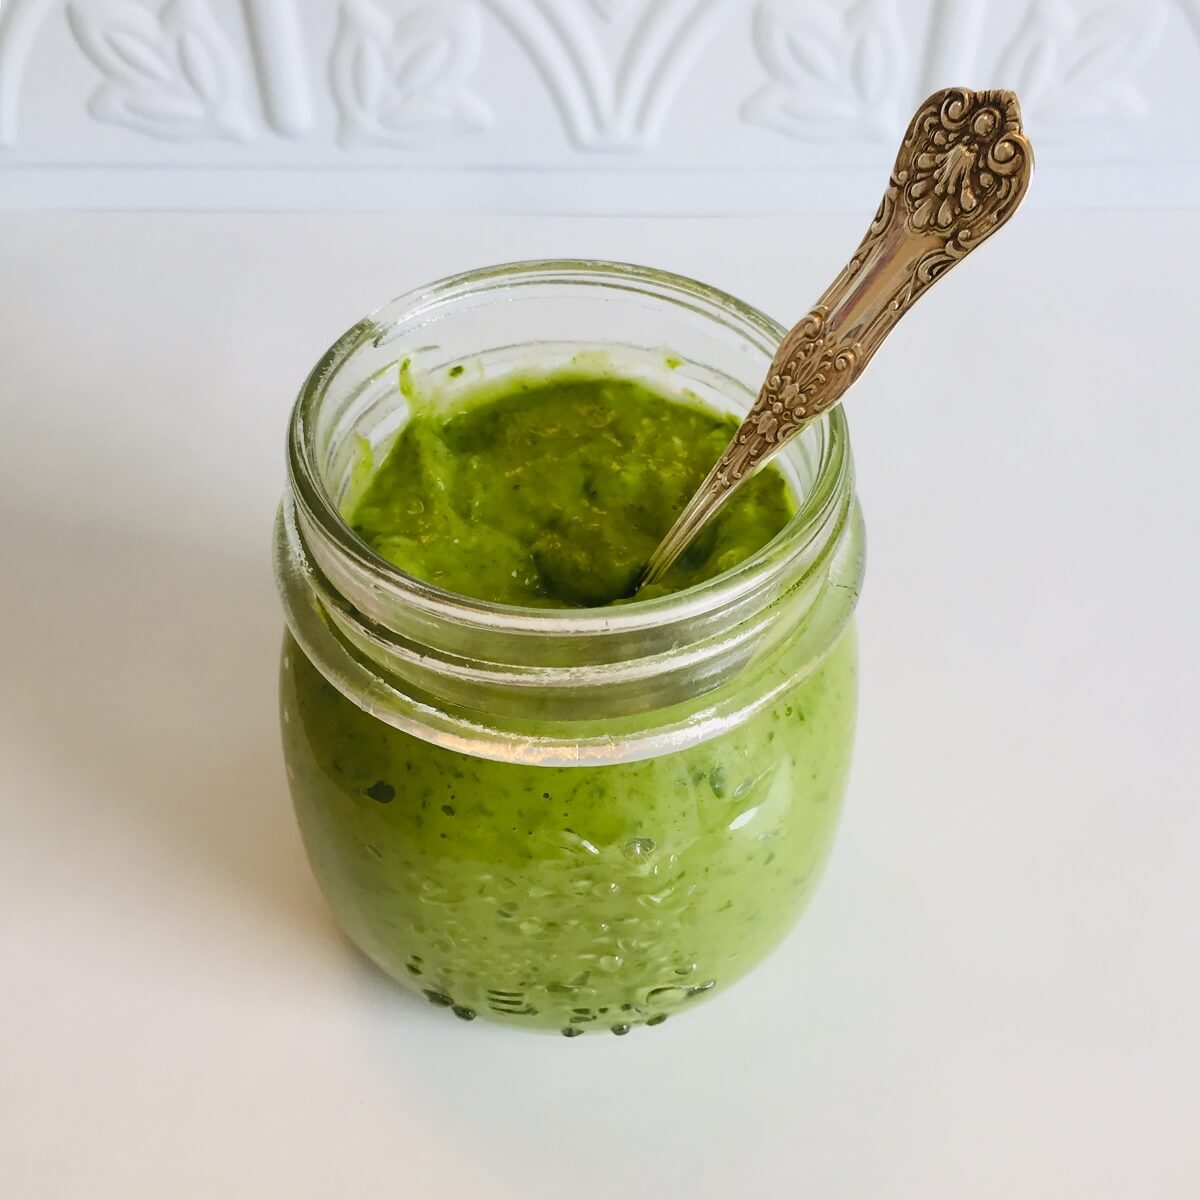 Avocado green goddess dressing in a jar with a spoon.